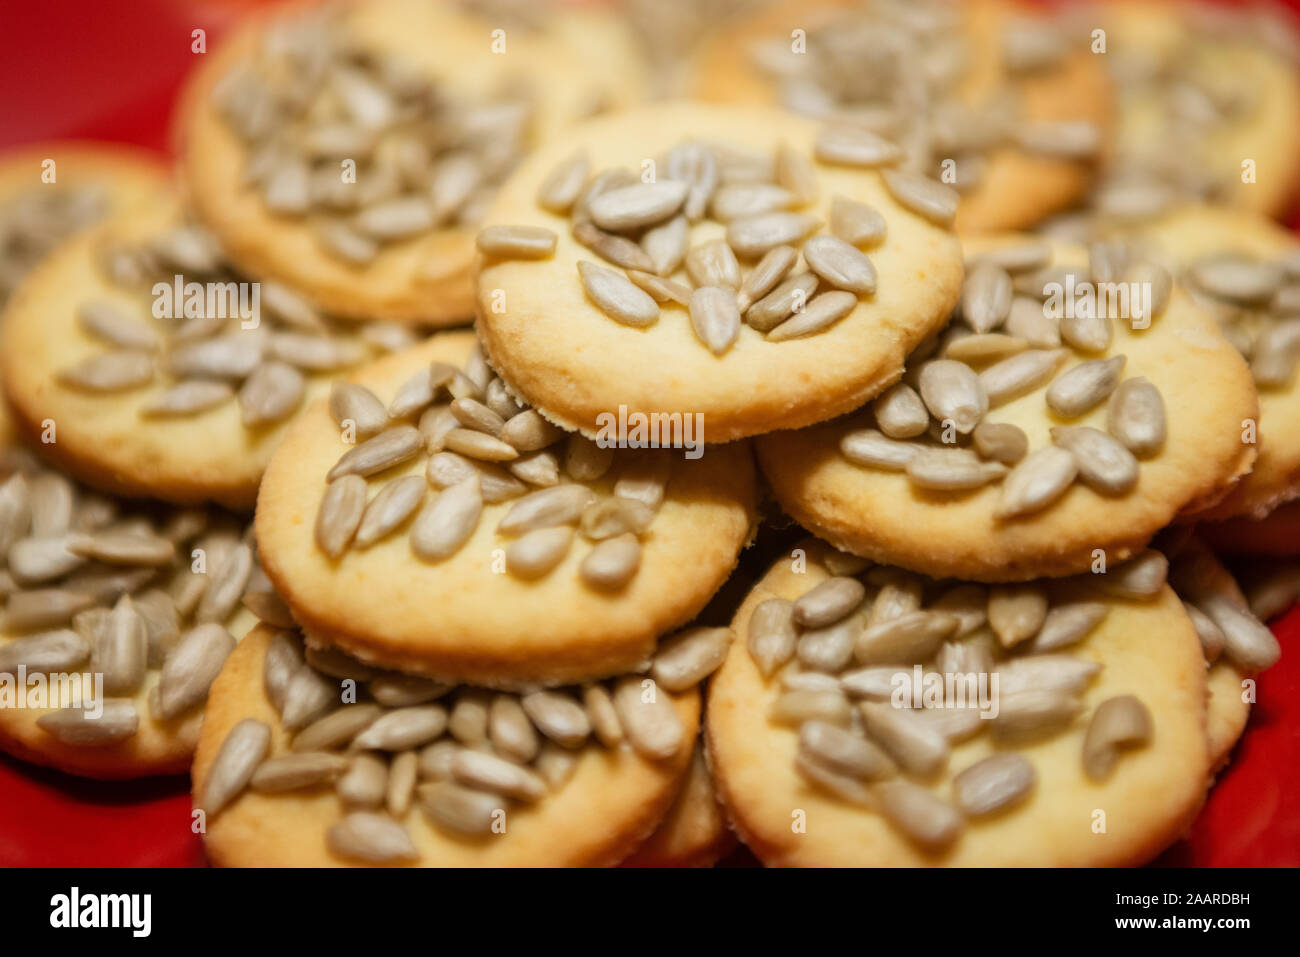 Home made cookies with sunflower seeds fresh out of the oven, served on a plate Stock Photo